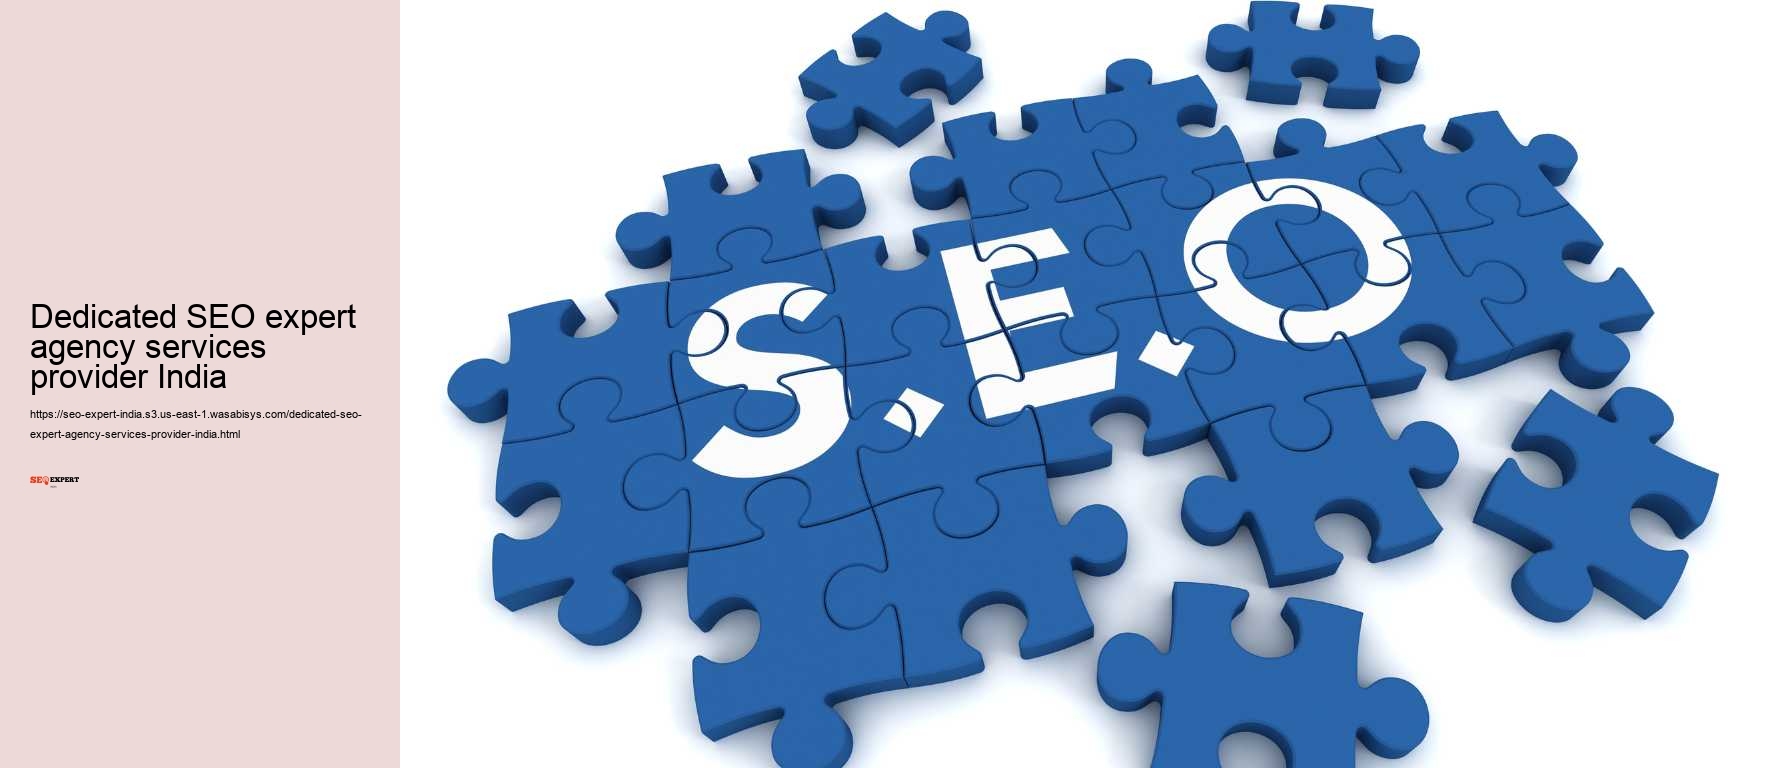 Dedicated SEO expert agency services provider India